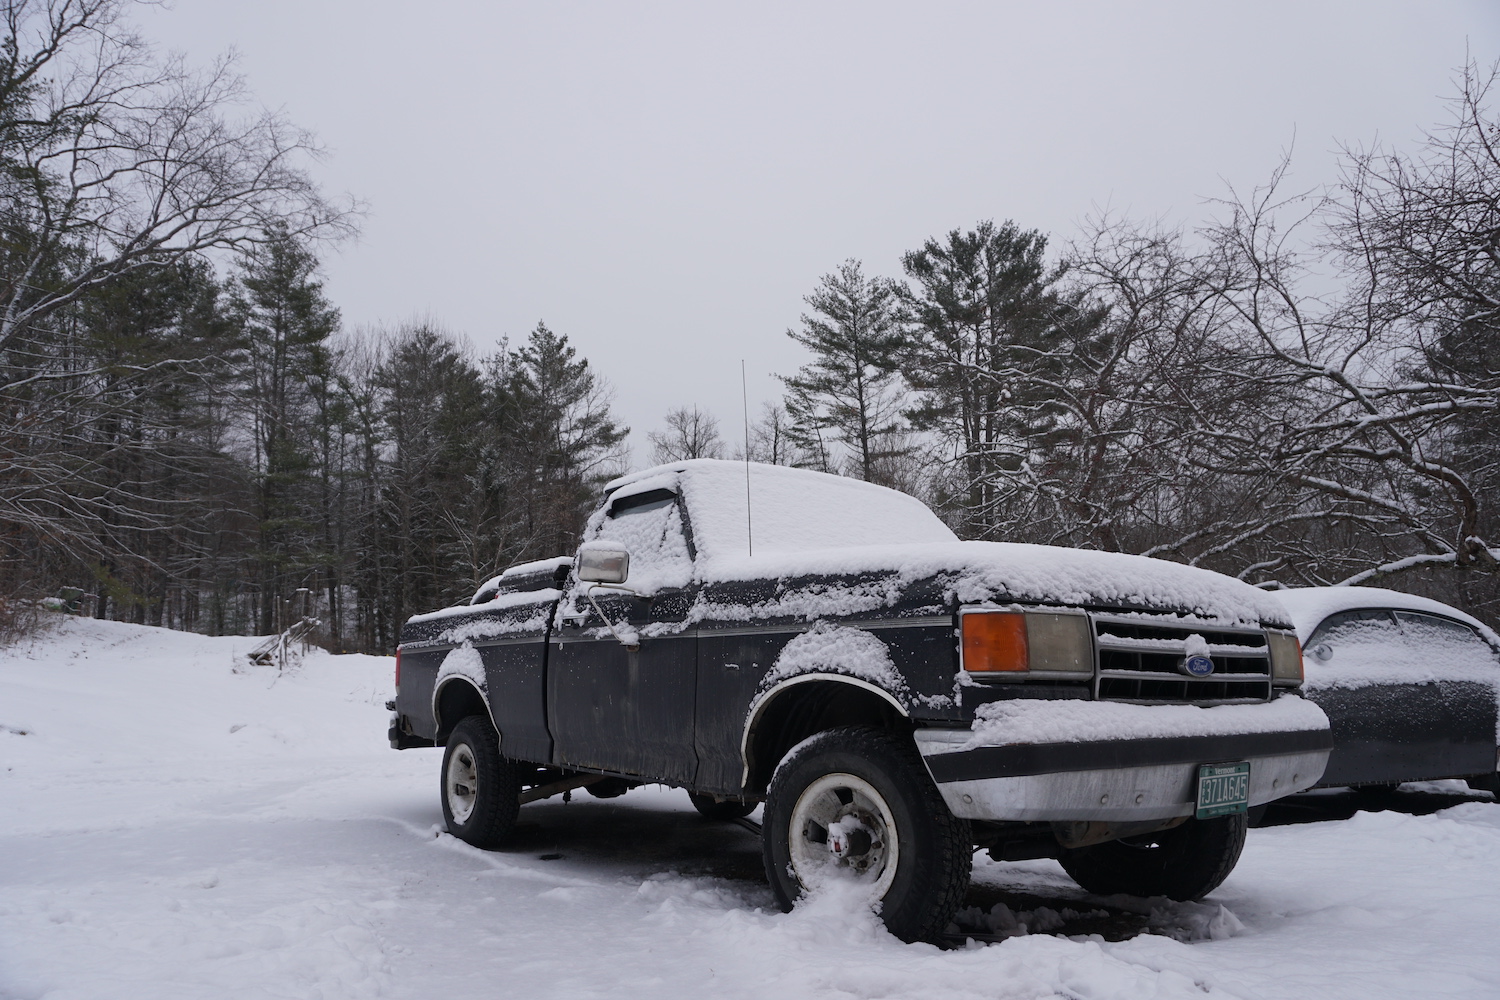 A black Ford F-150 pickup truck covered in snow, has a larger engine with more oil that might have problems in cold weather starting.